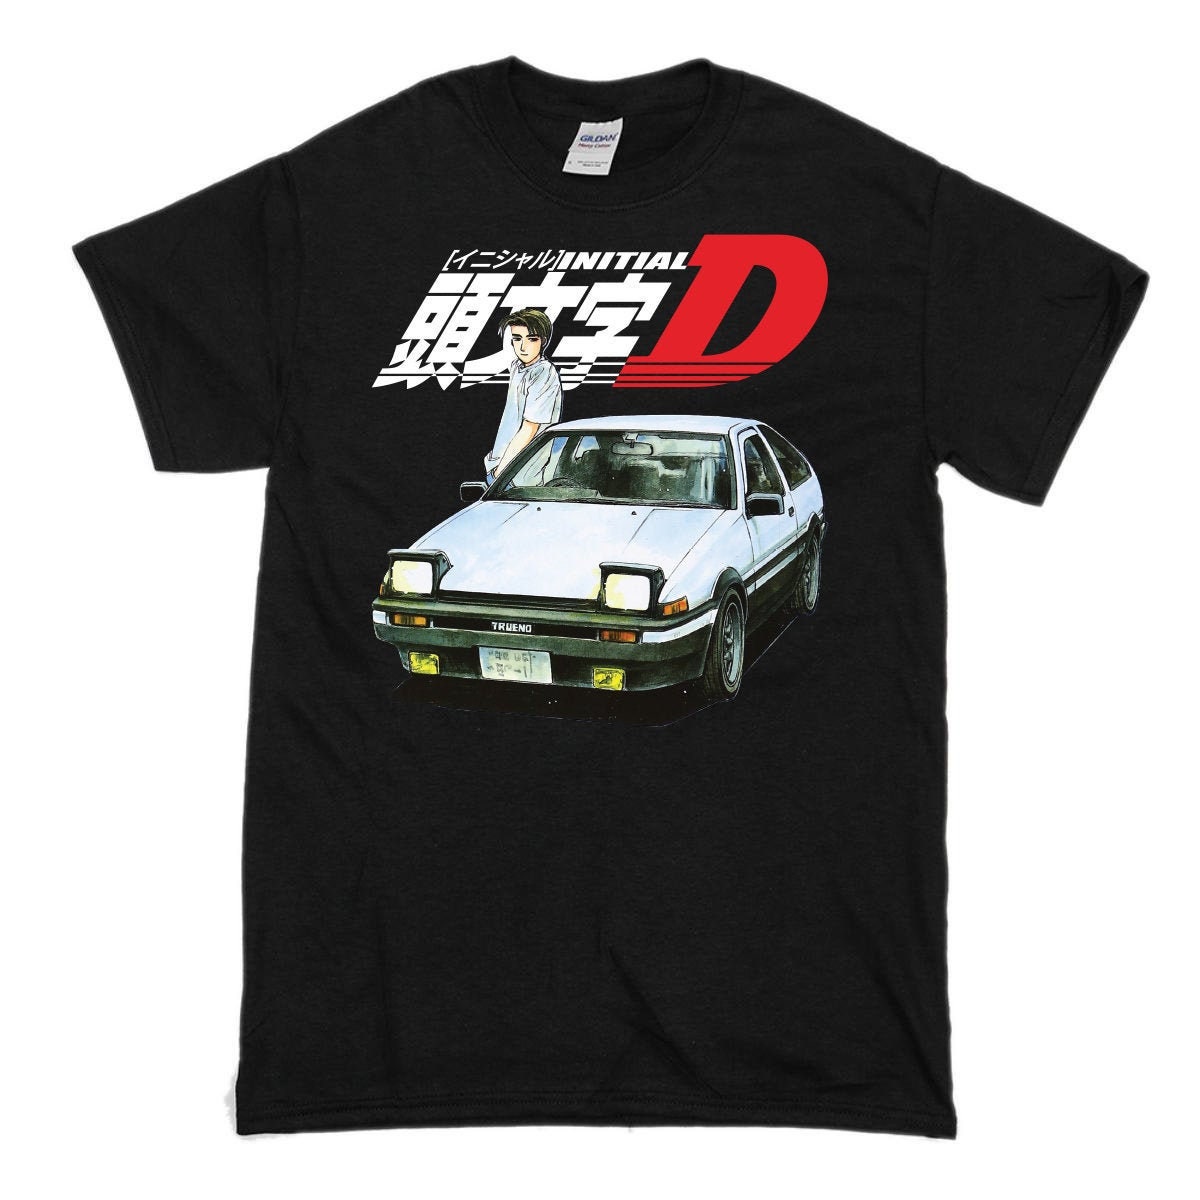 Drift Games - 😎 NEW MERCH IS LIVE 😎⁠ ⁠ Our biggest